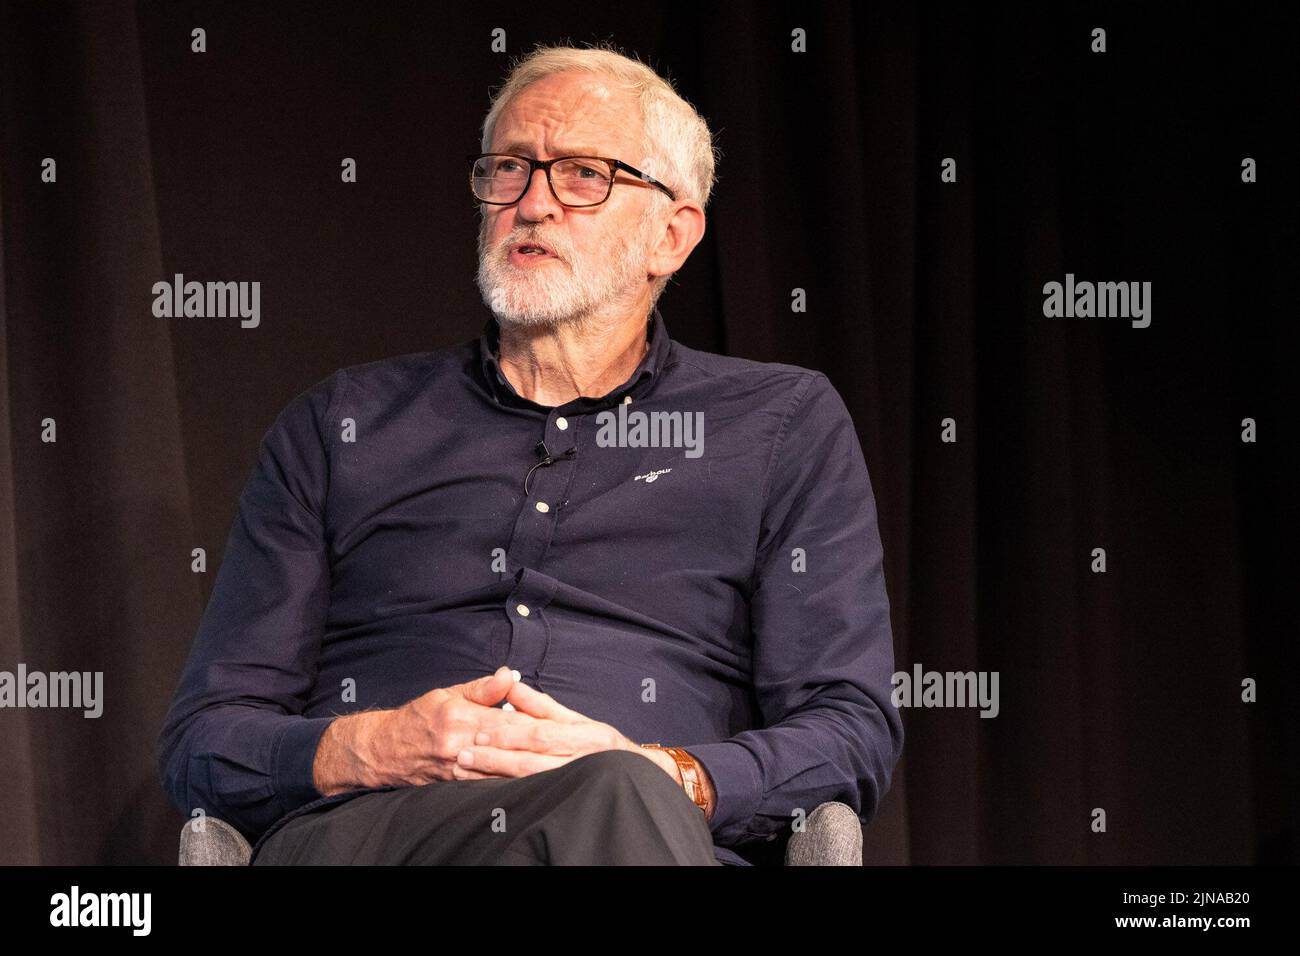 Edinburgh, United Kingdom. 10 August, 2022 Pictured: Former Labour leader, Jeremy Corbyn, is interviewed by LBC’s Iain Dale at the Edinburgh Fringe Festival as part of the All Talk series of interviews by the broadcaster. Corbyn told the audience that he feels vindicated by the Forde Report in how he dealt with anti-semitism while leader. Credit: Rich Dyson/Alamy Live News Stock Photo